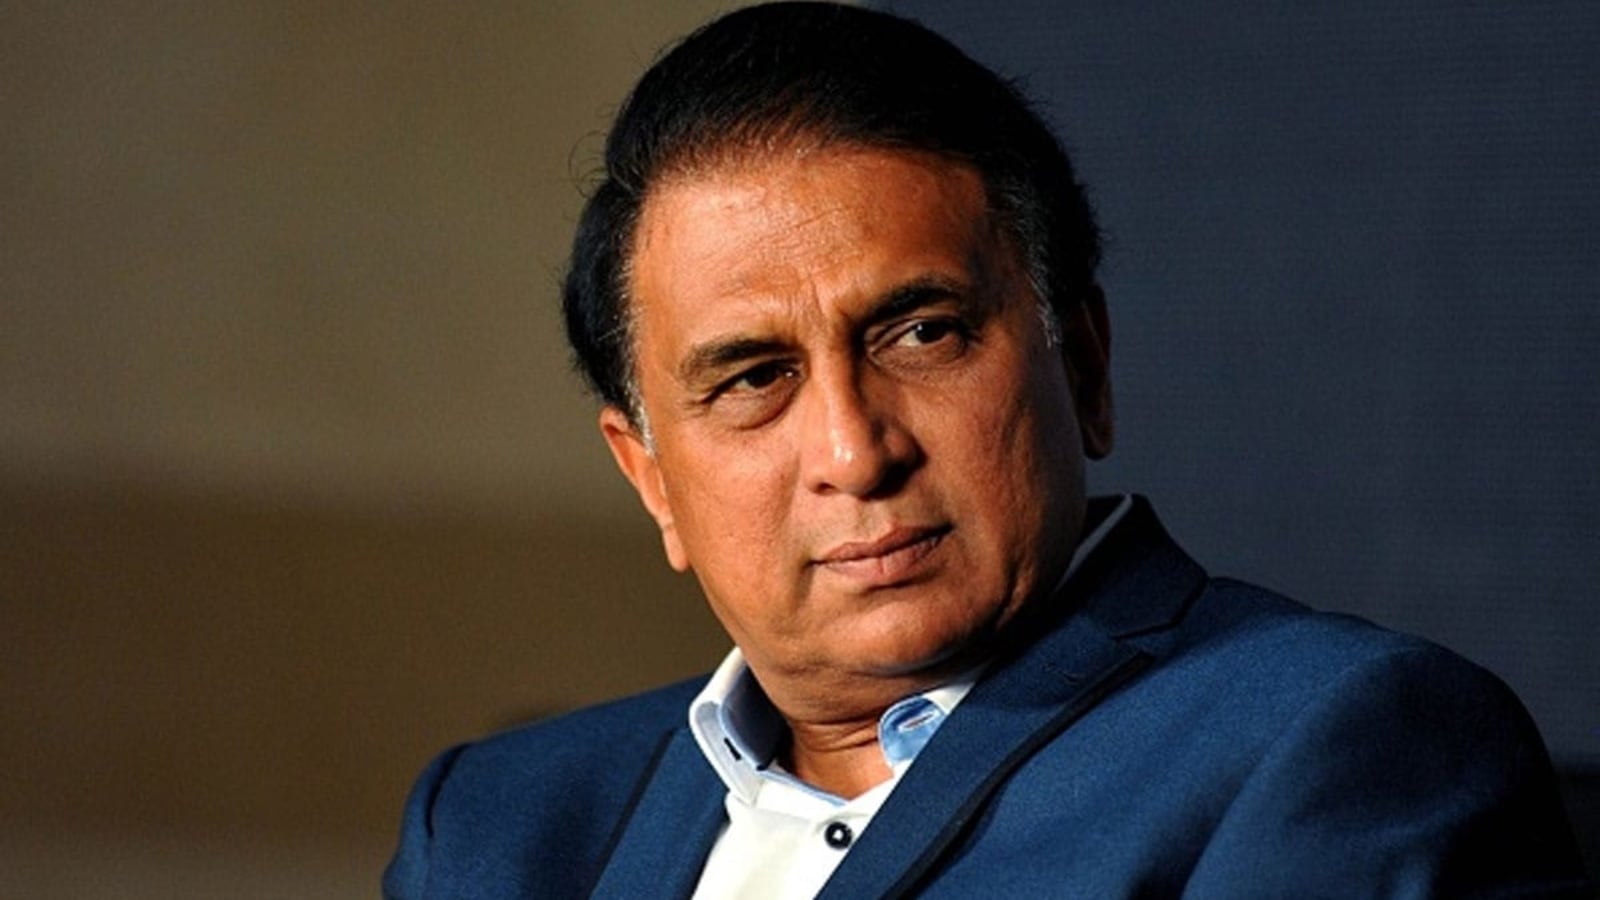 Sunil Gavaskar says “England-New Zealand semi-final could be the best game of the tournament” in T20 World Cup 2021